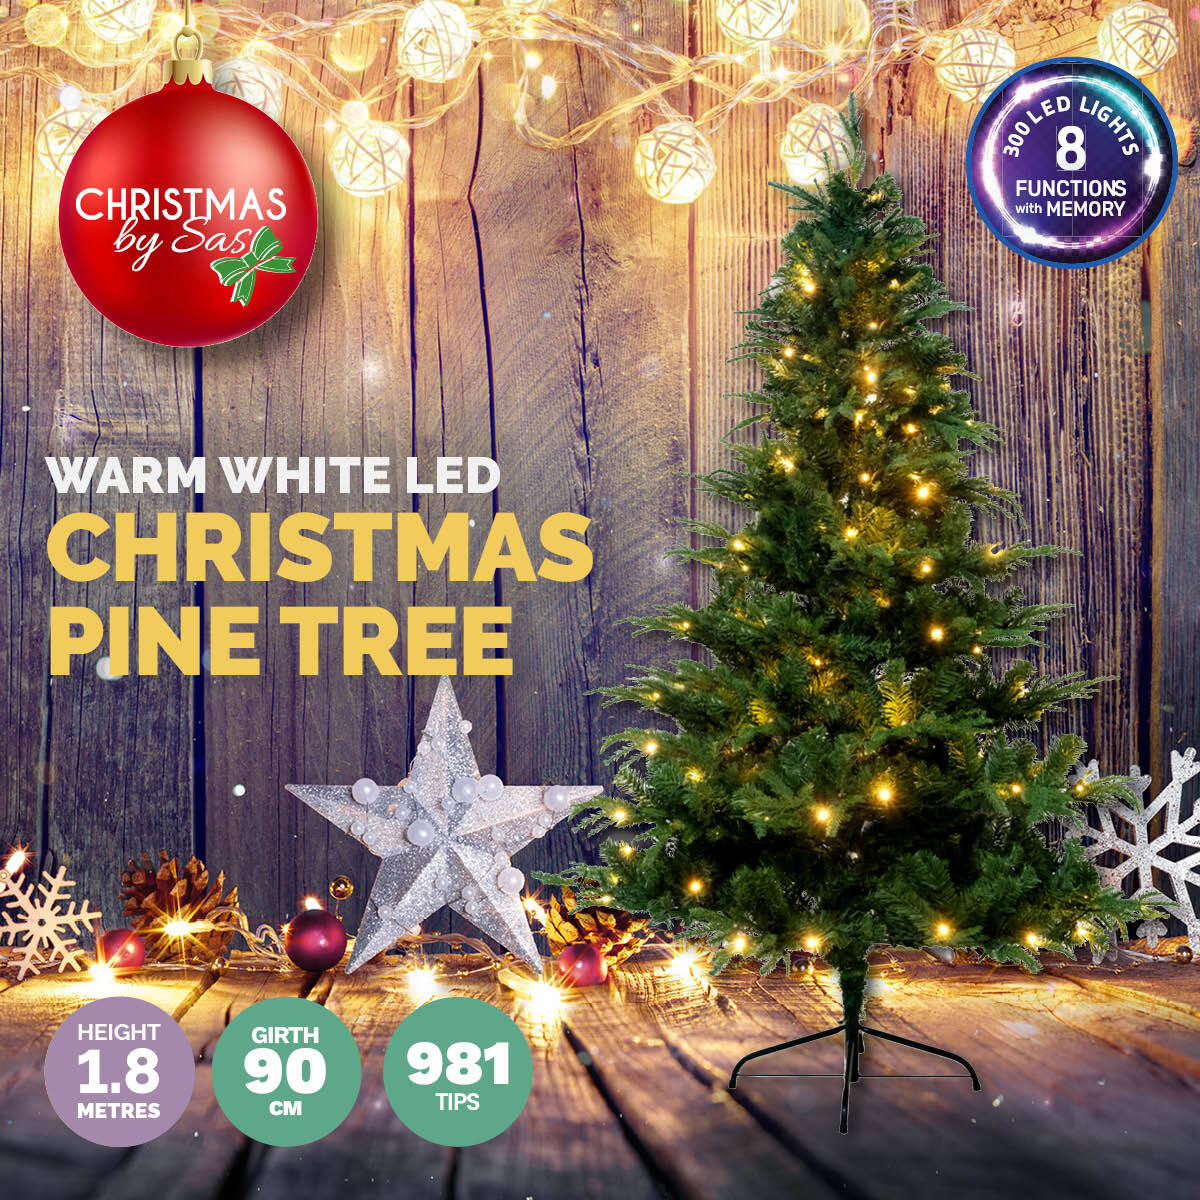 Christmas By Sas 1.8m Pine Tree 300 Warm White LED Lights With 8 Functions - SILBERSHELL